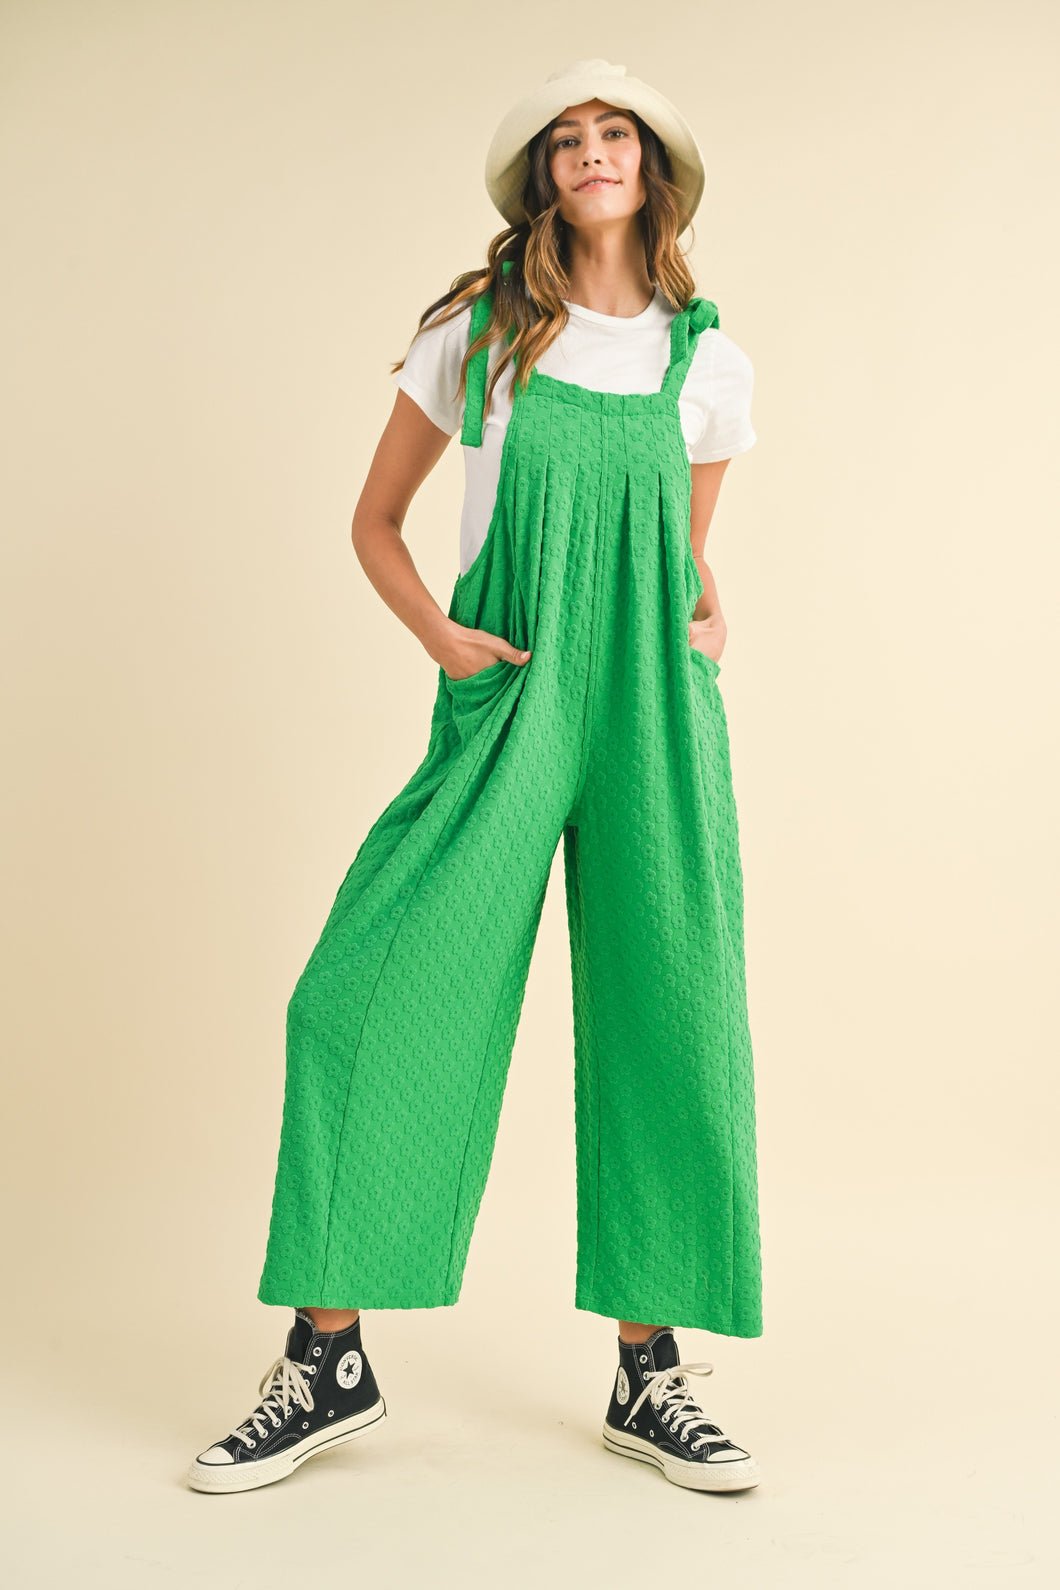 AnnieWear Terry Knit Jumpsuit with Textured Daisies in Kelly Green